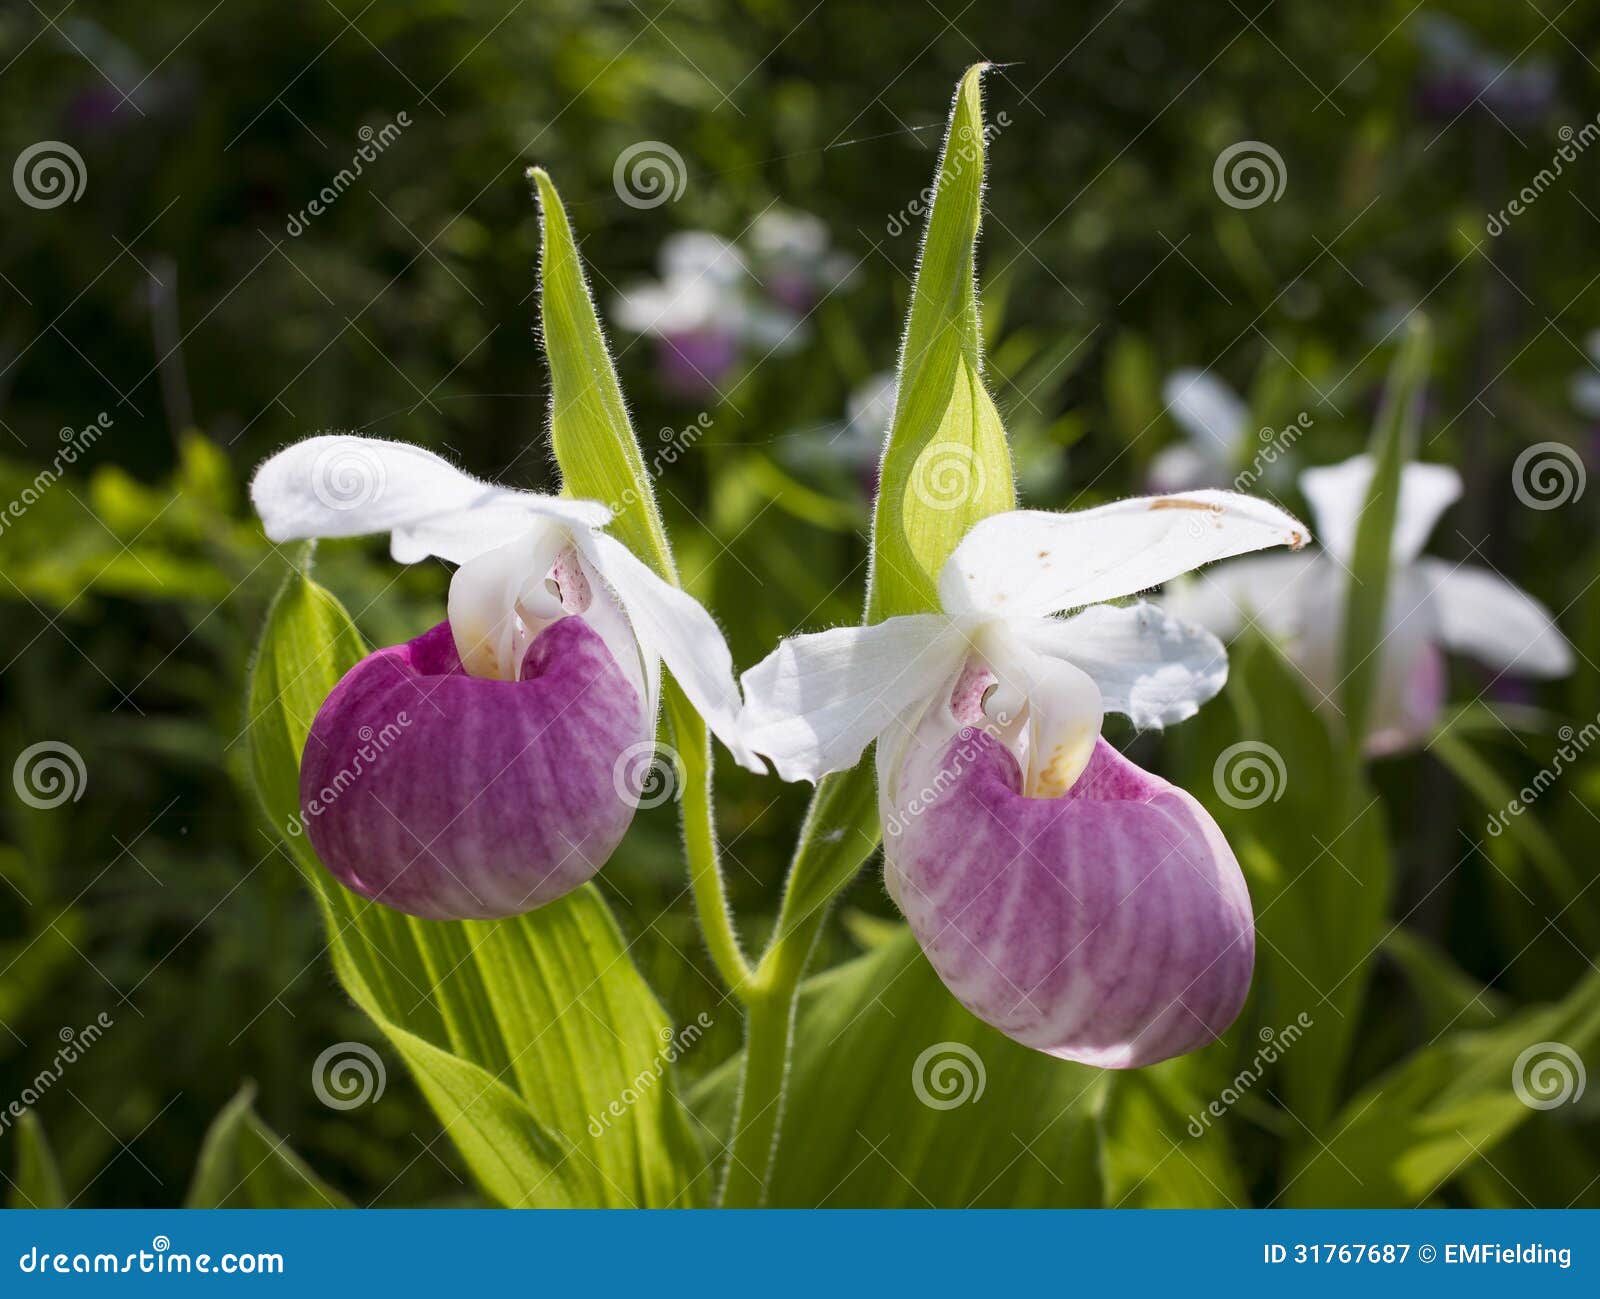 lady slipper orchid